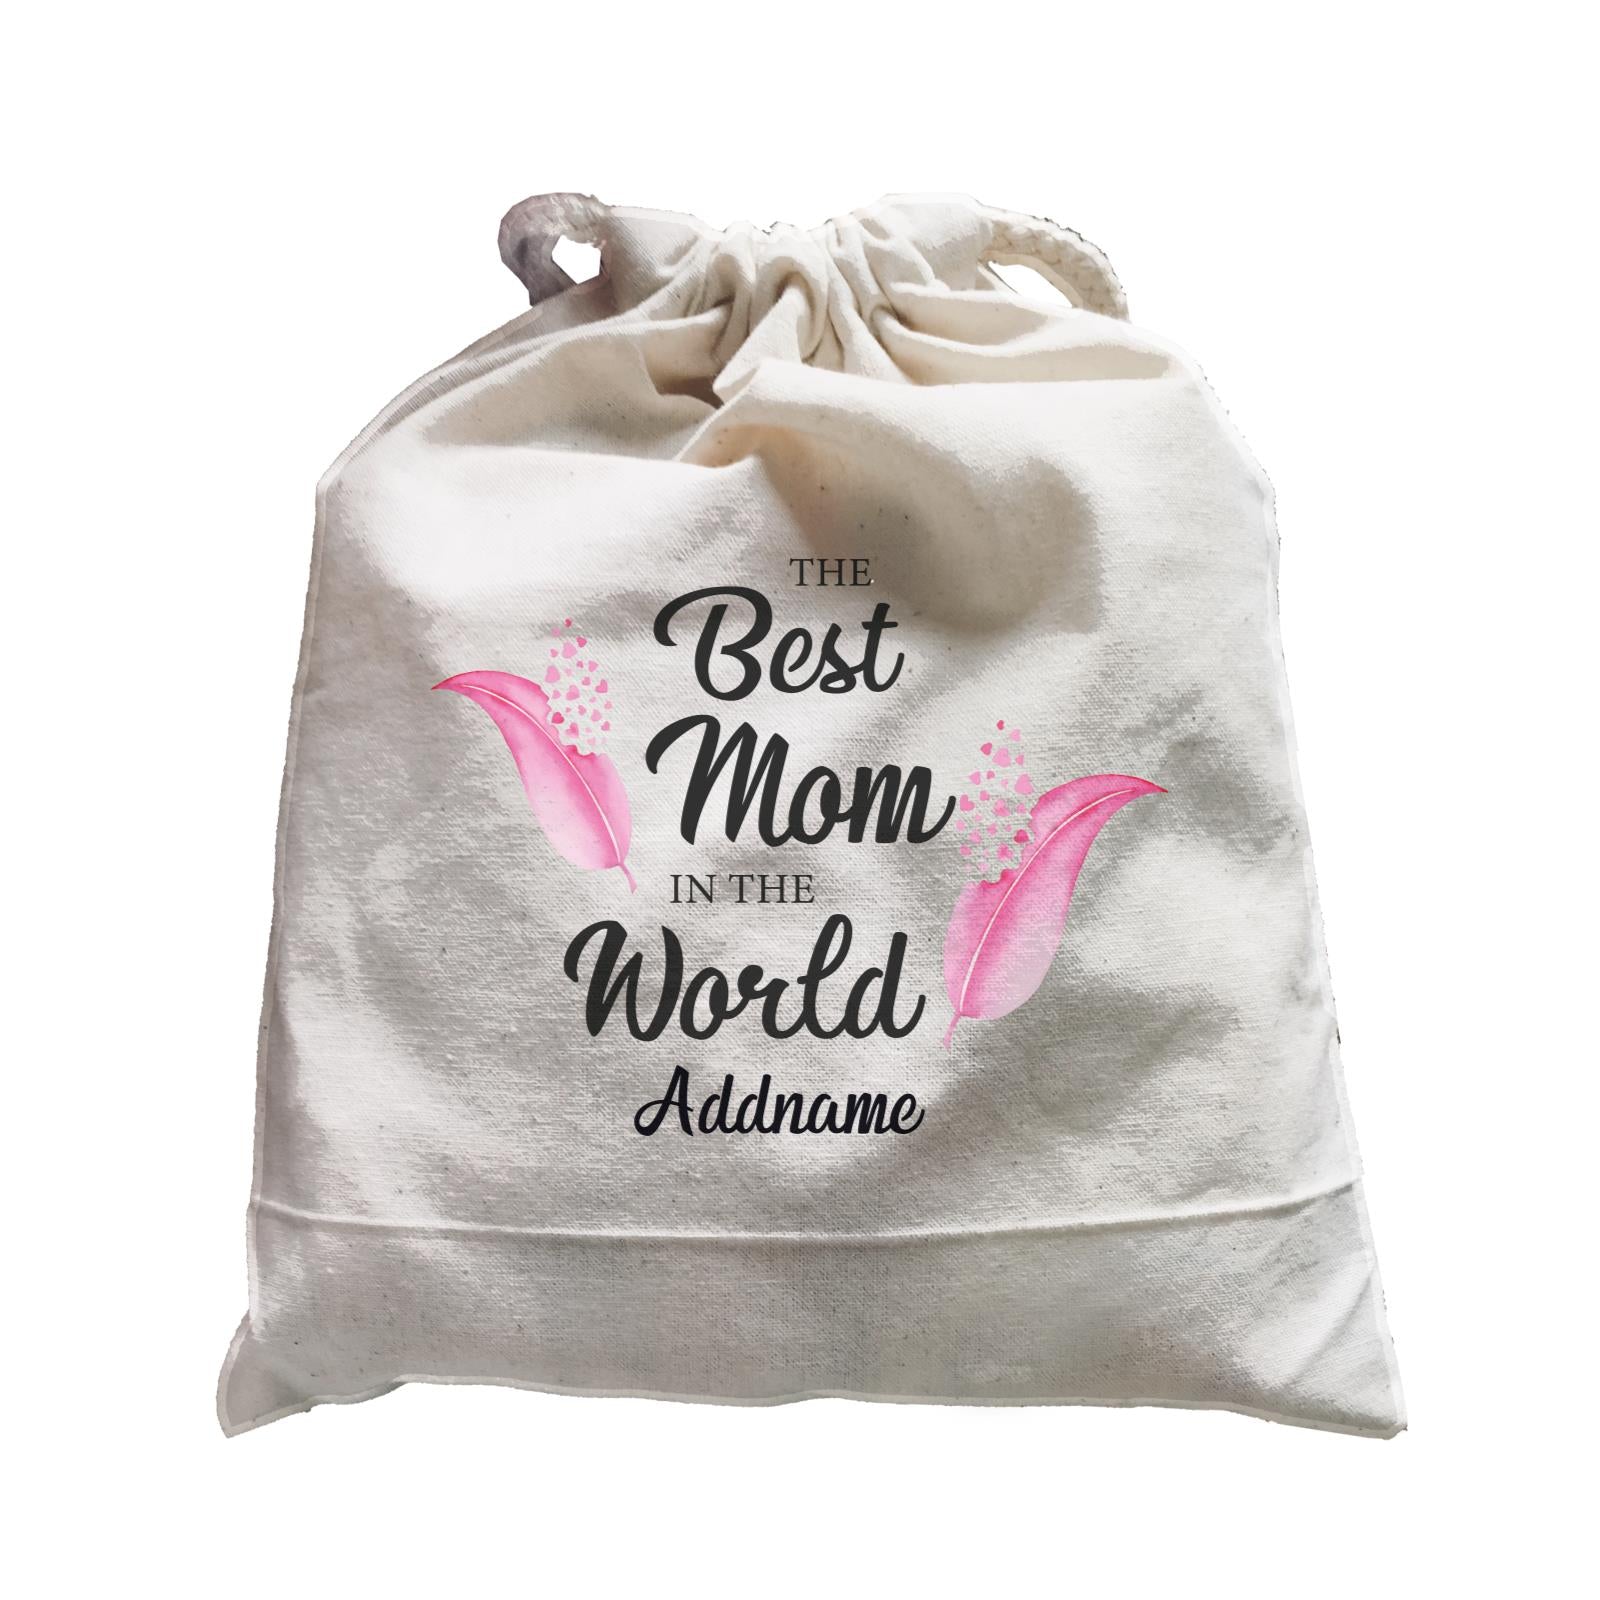 Sweet Mom Quotes 1 Love Feathers The Best Mom In The World Addname Accessories Satchel